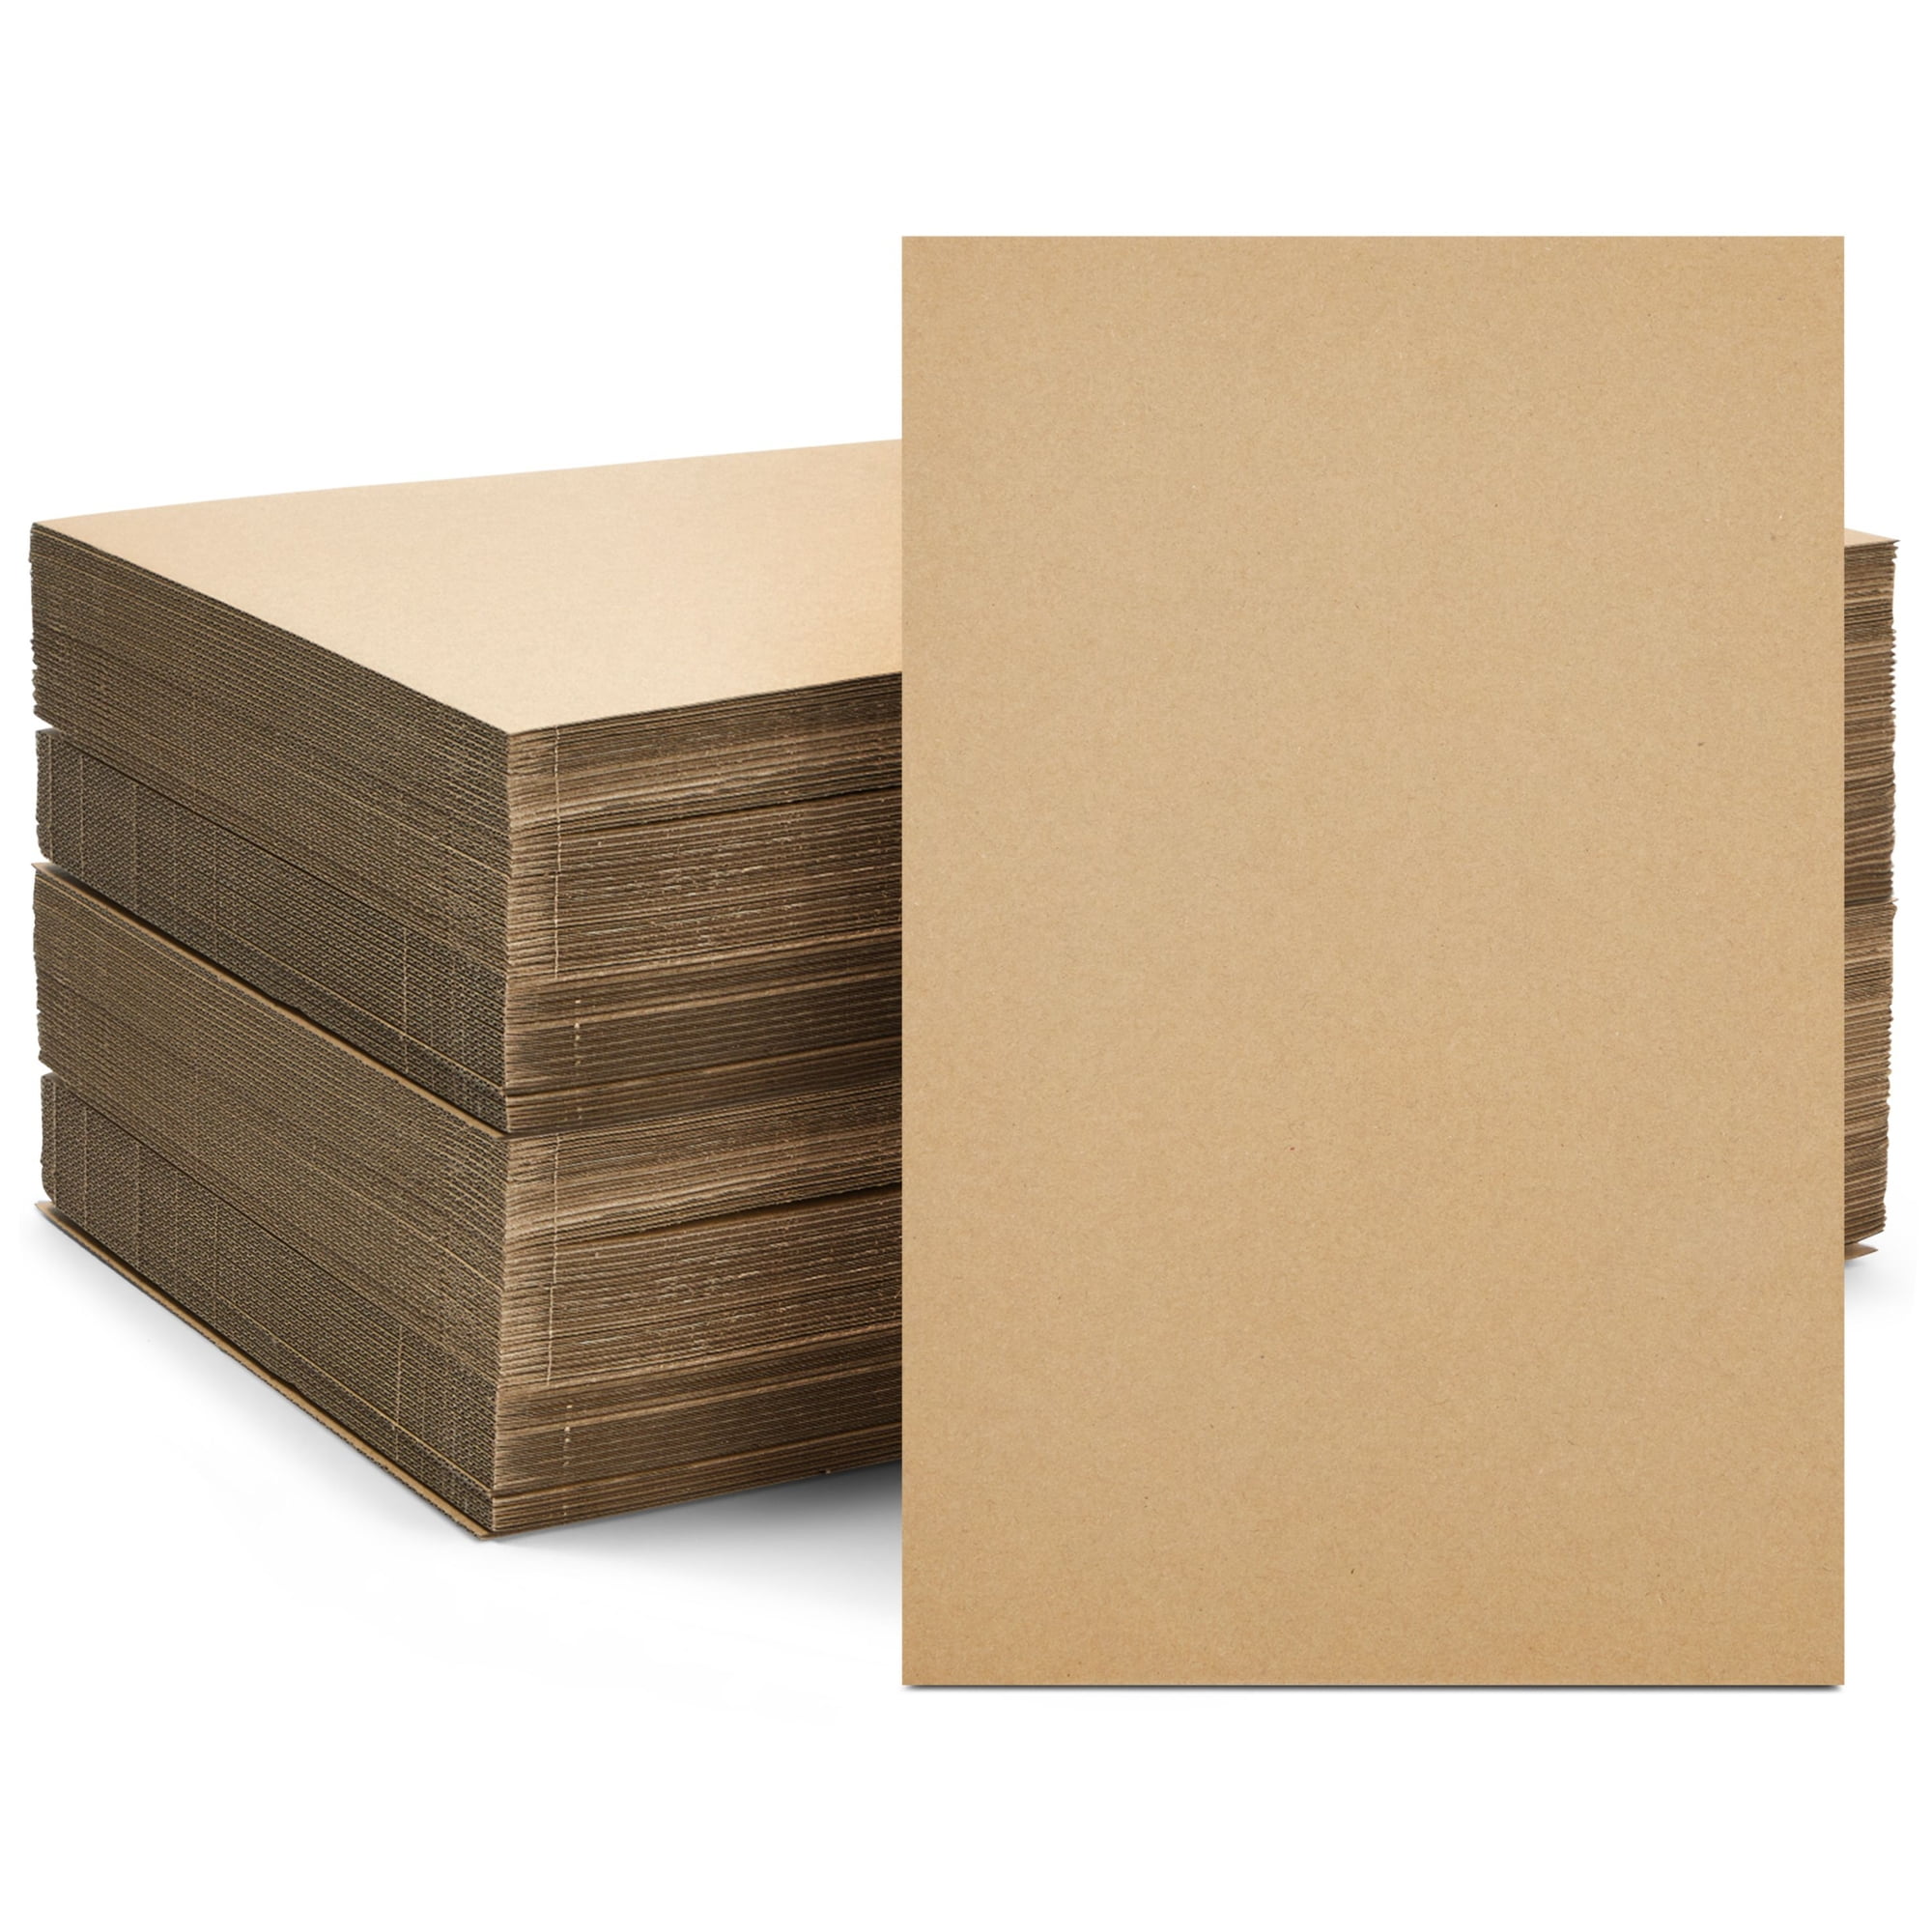 50-Pack Large Corrugated Cardboard Sheets, 11x17-Inch Flat Packaging  Inserts Pads for Mailers, Shipping, Packing, Mailing, Arts and Crafts, DIY